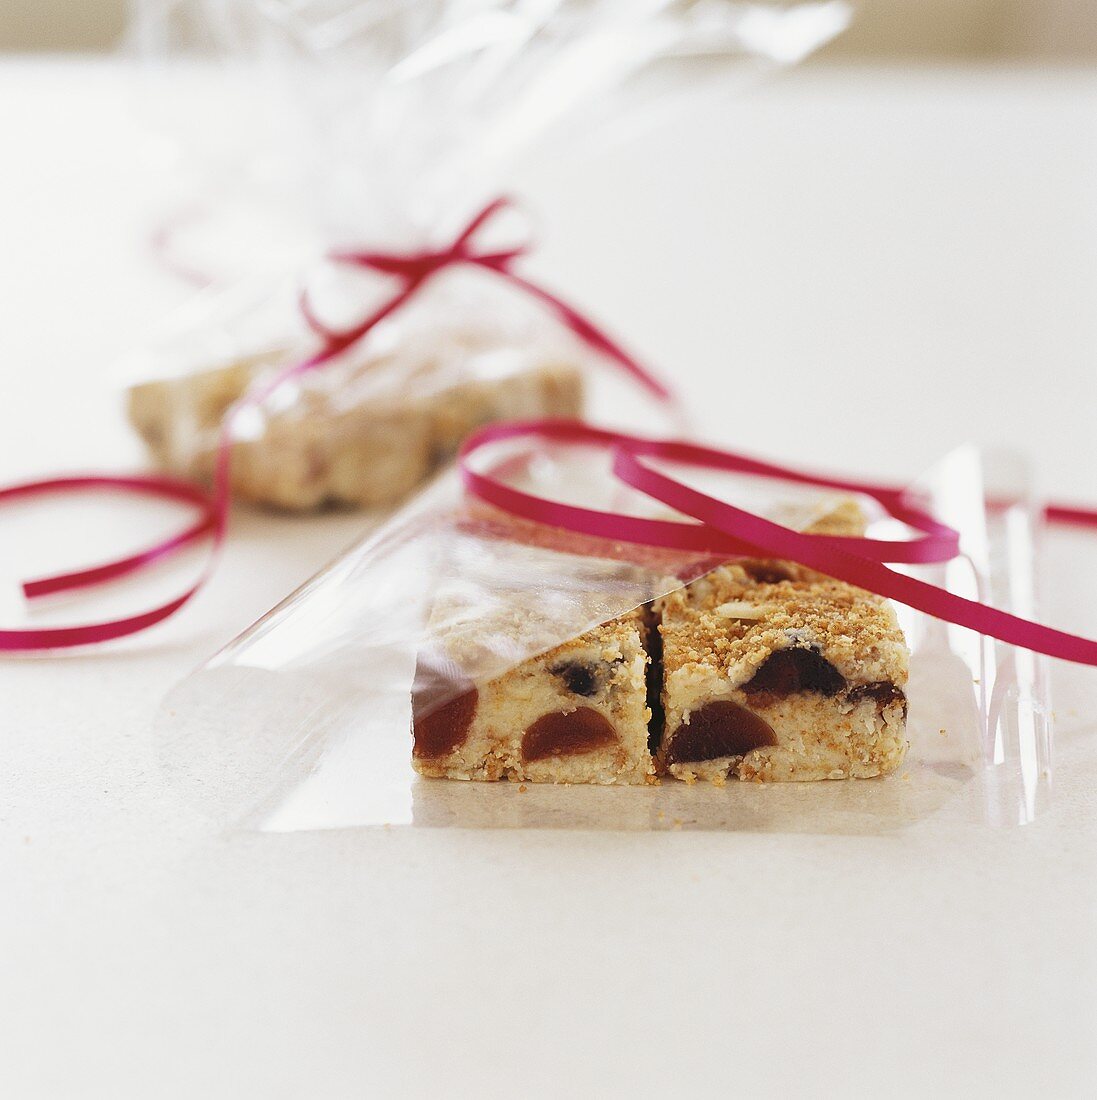 Cherry crumble slices, packed in cellophane